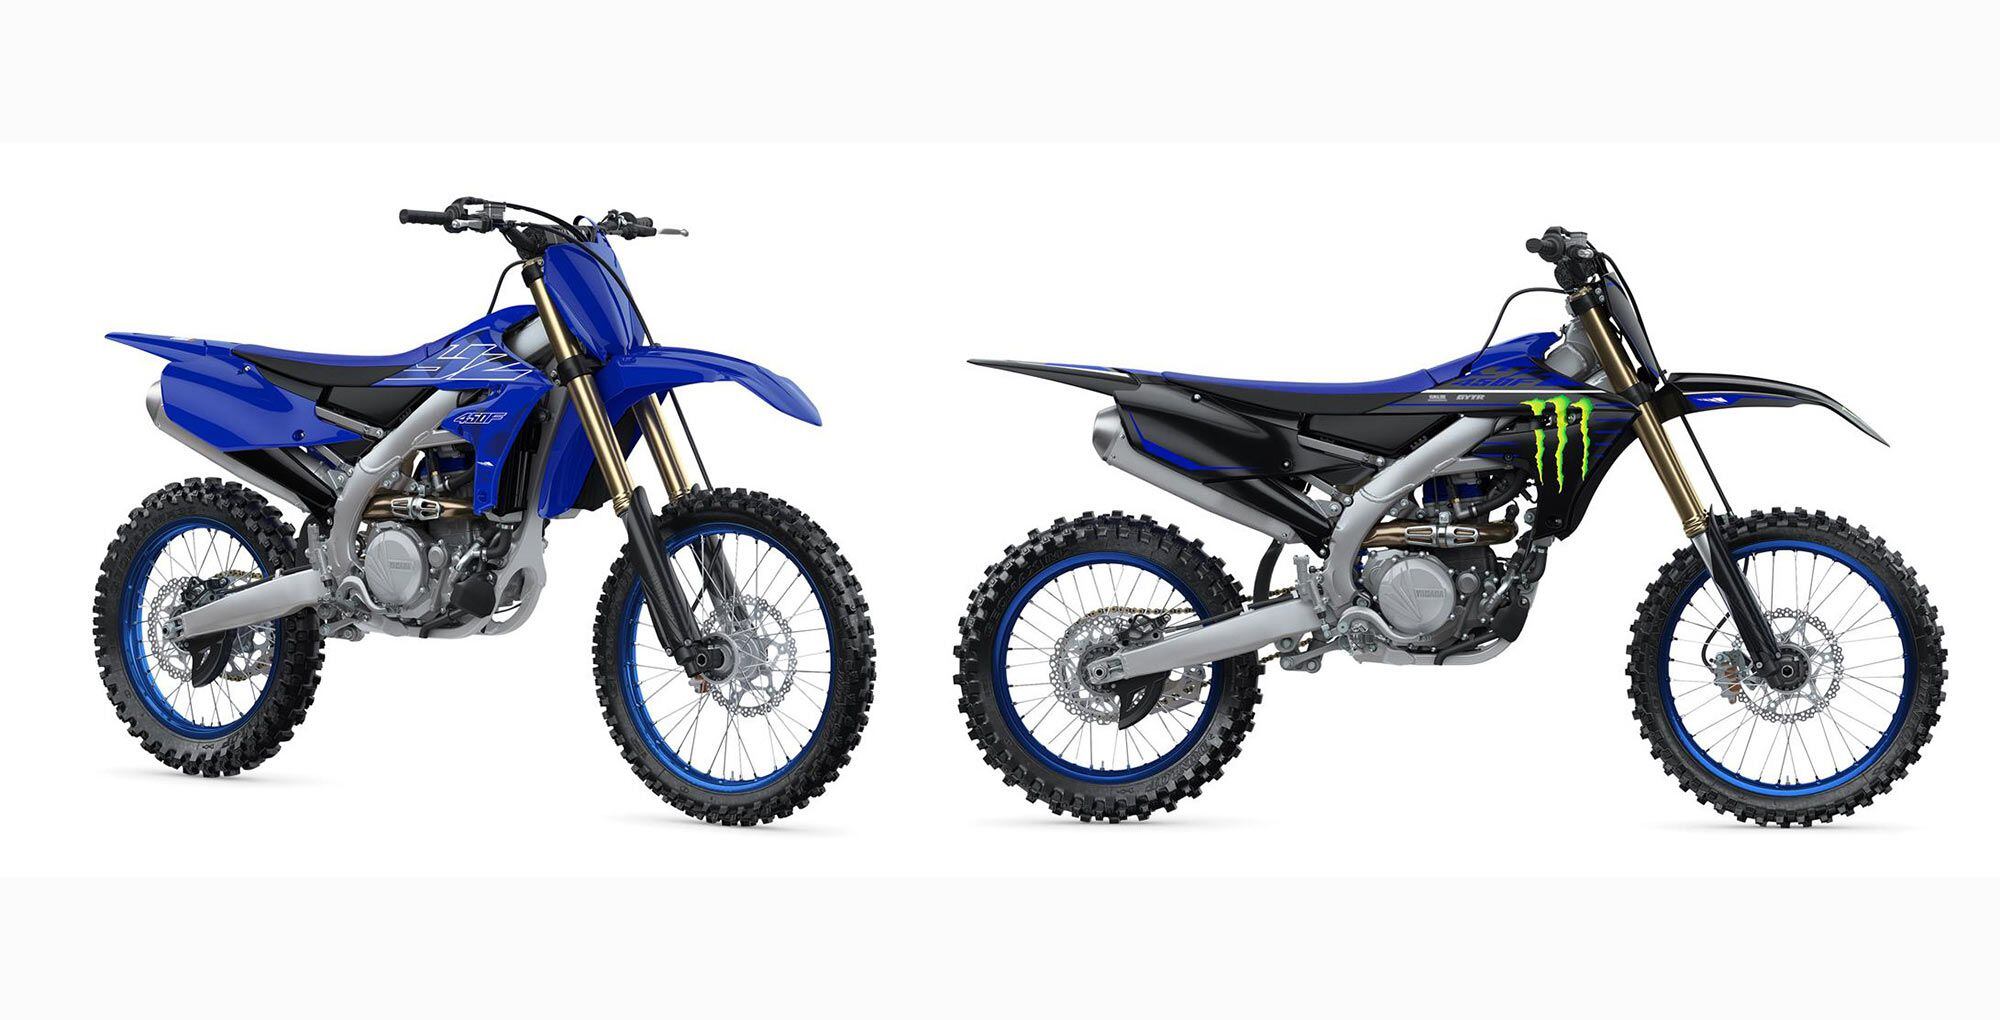 The 2022 Yamaha YZ450F (left) and YZ450F Monster Energy Yamaha Racing Edition (right) are different in looks and price.